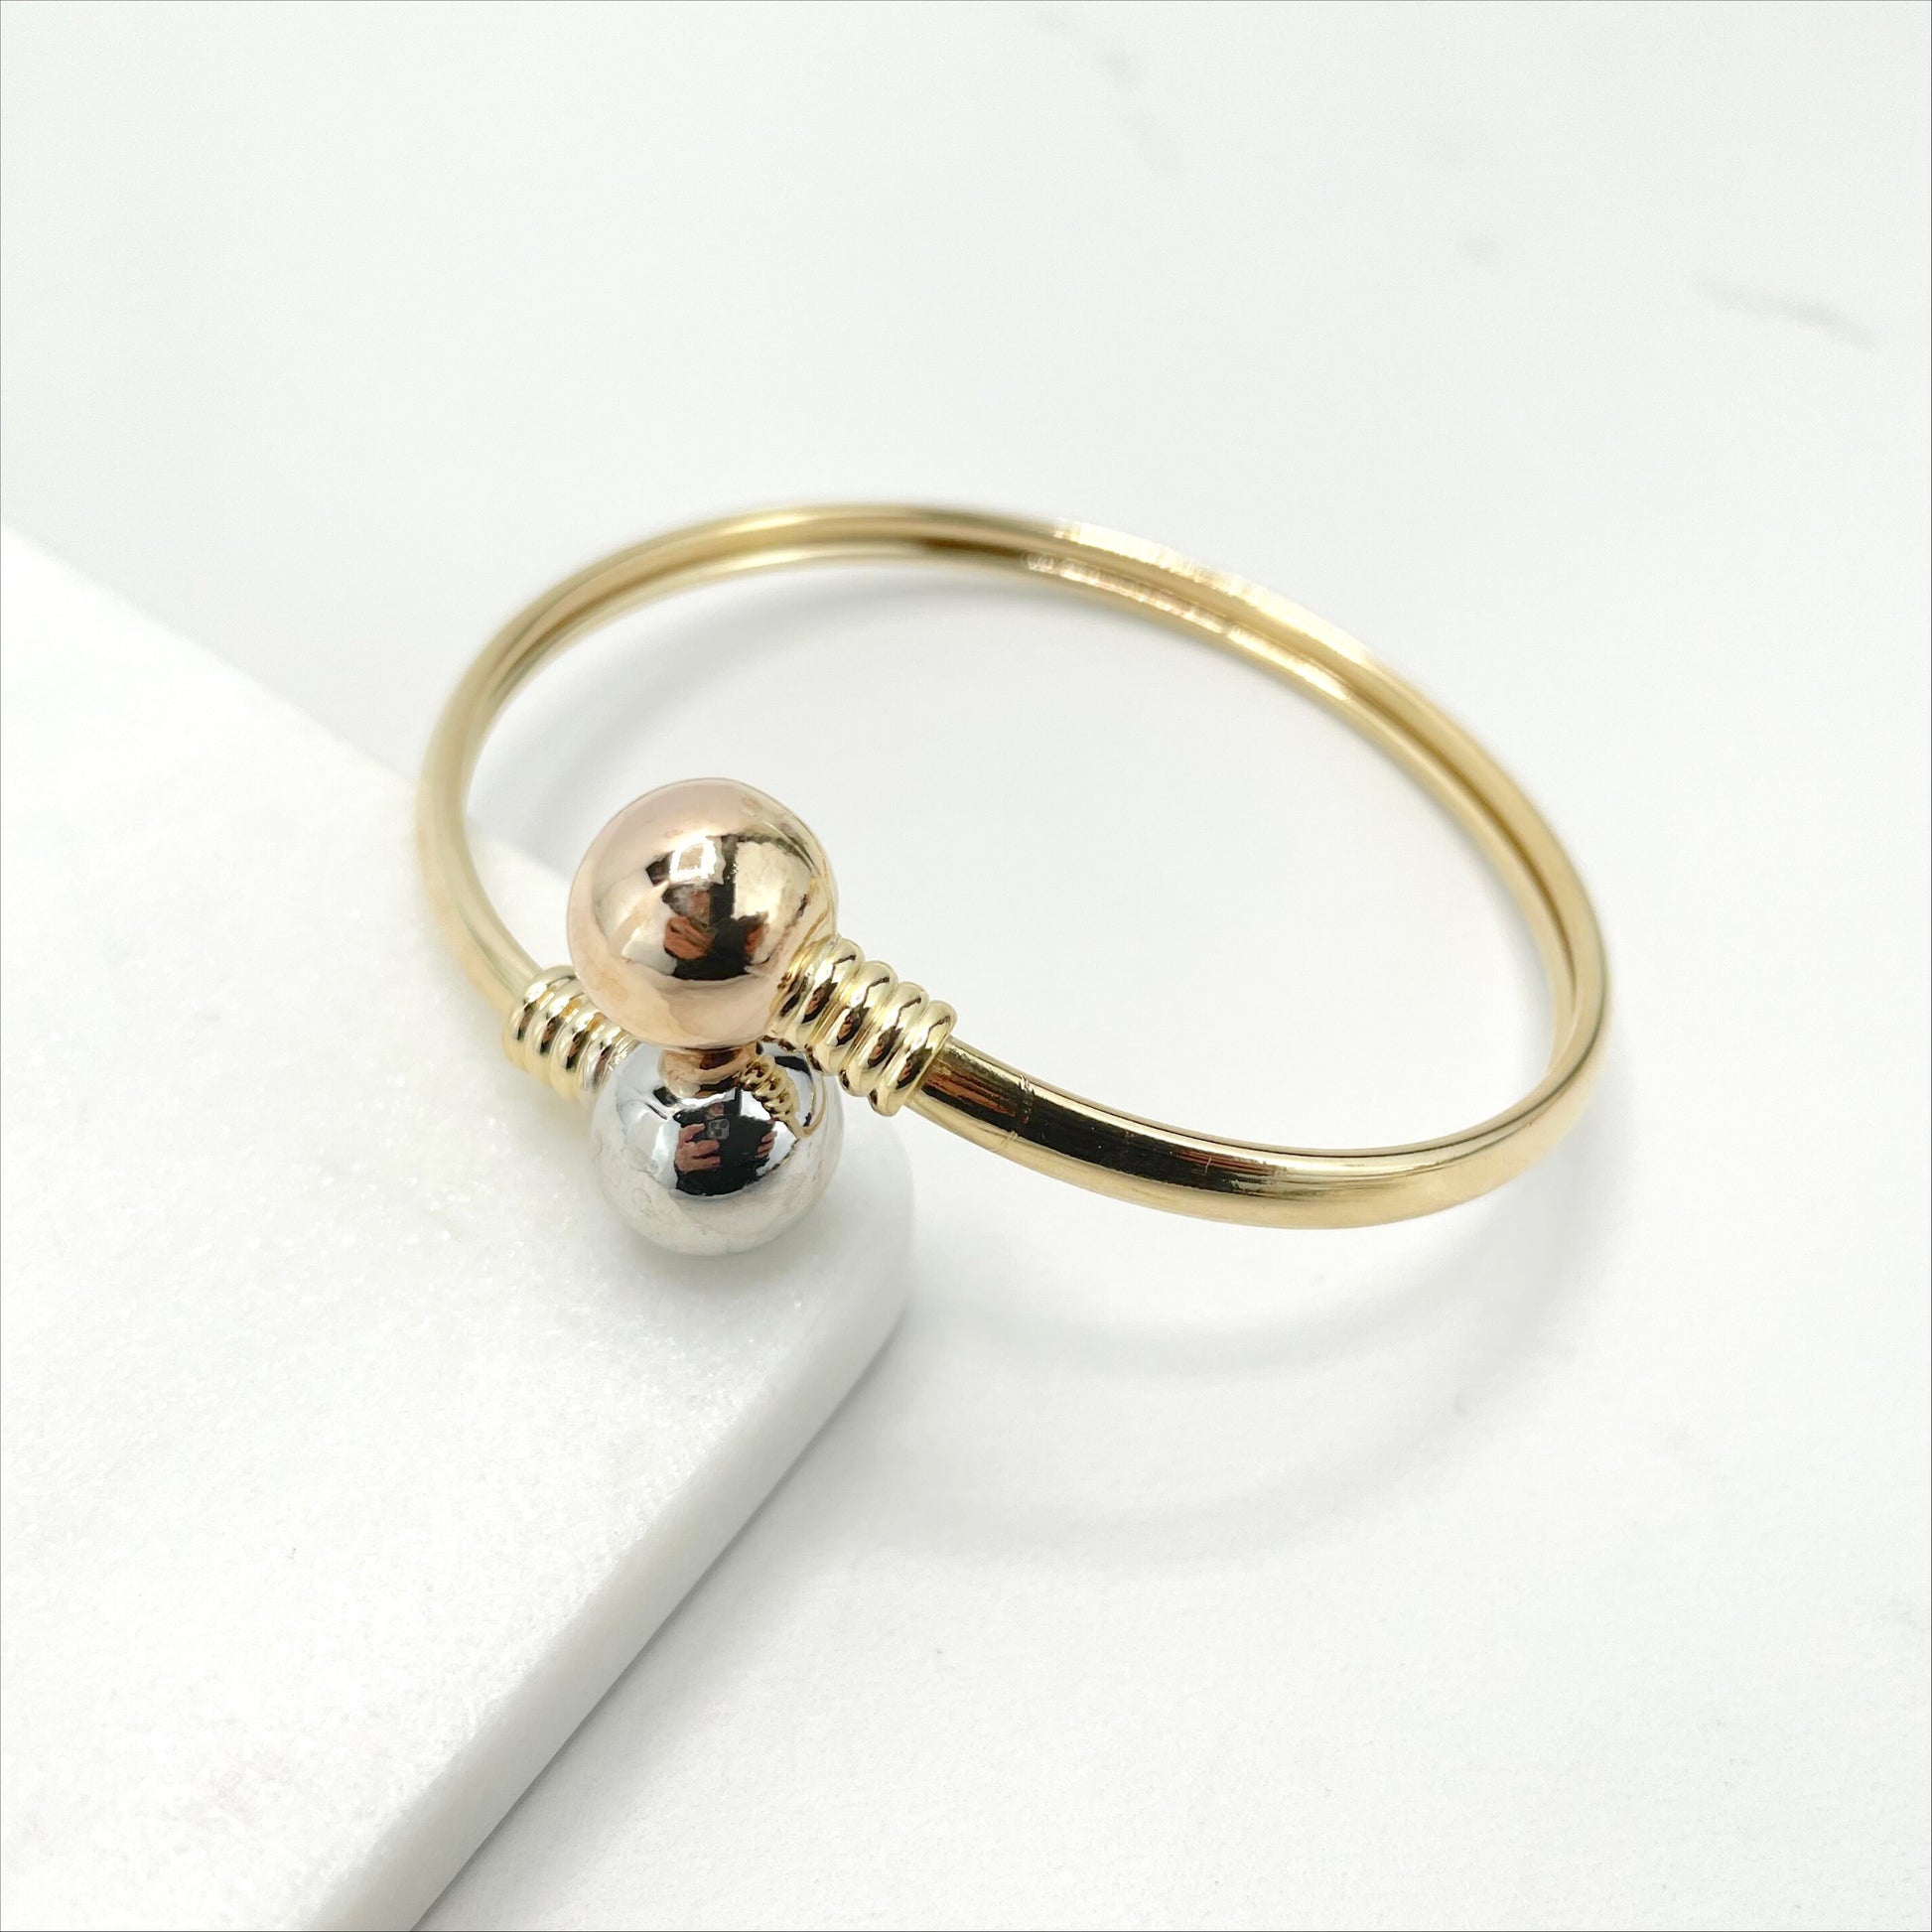 18k Gold Filled Wrist Cuff Bangle with Two Toned Balls, Gold and Silver or Rose Gold and Silver, Wholesale Jewelry Making Supplies